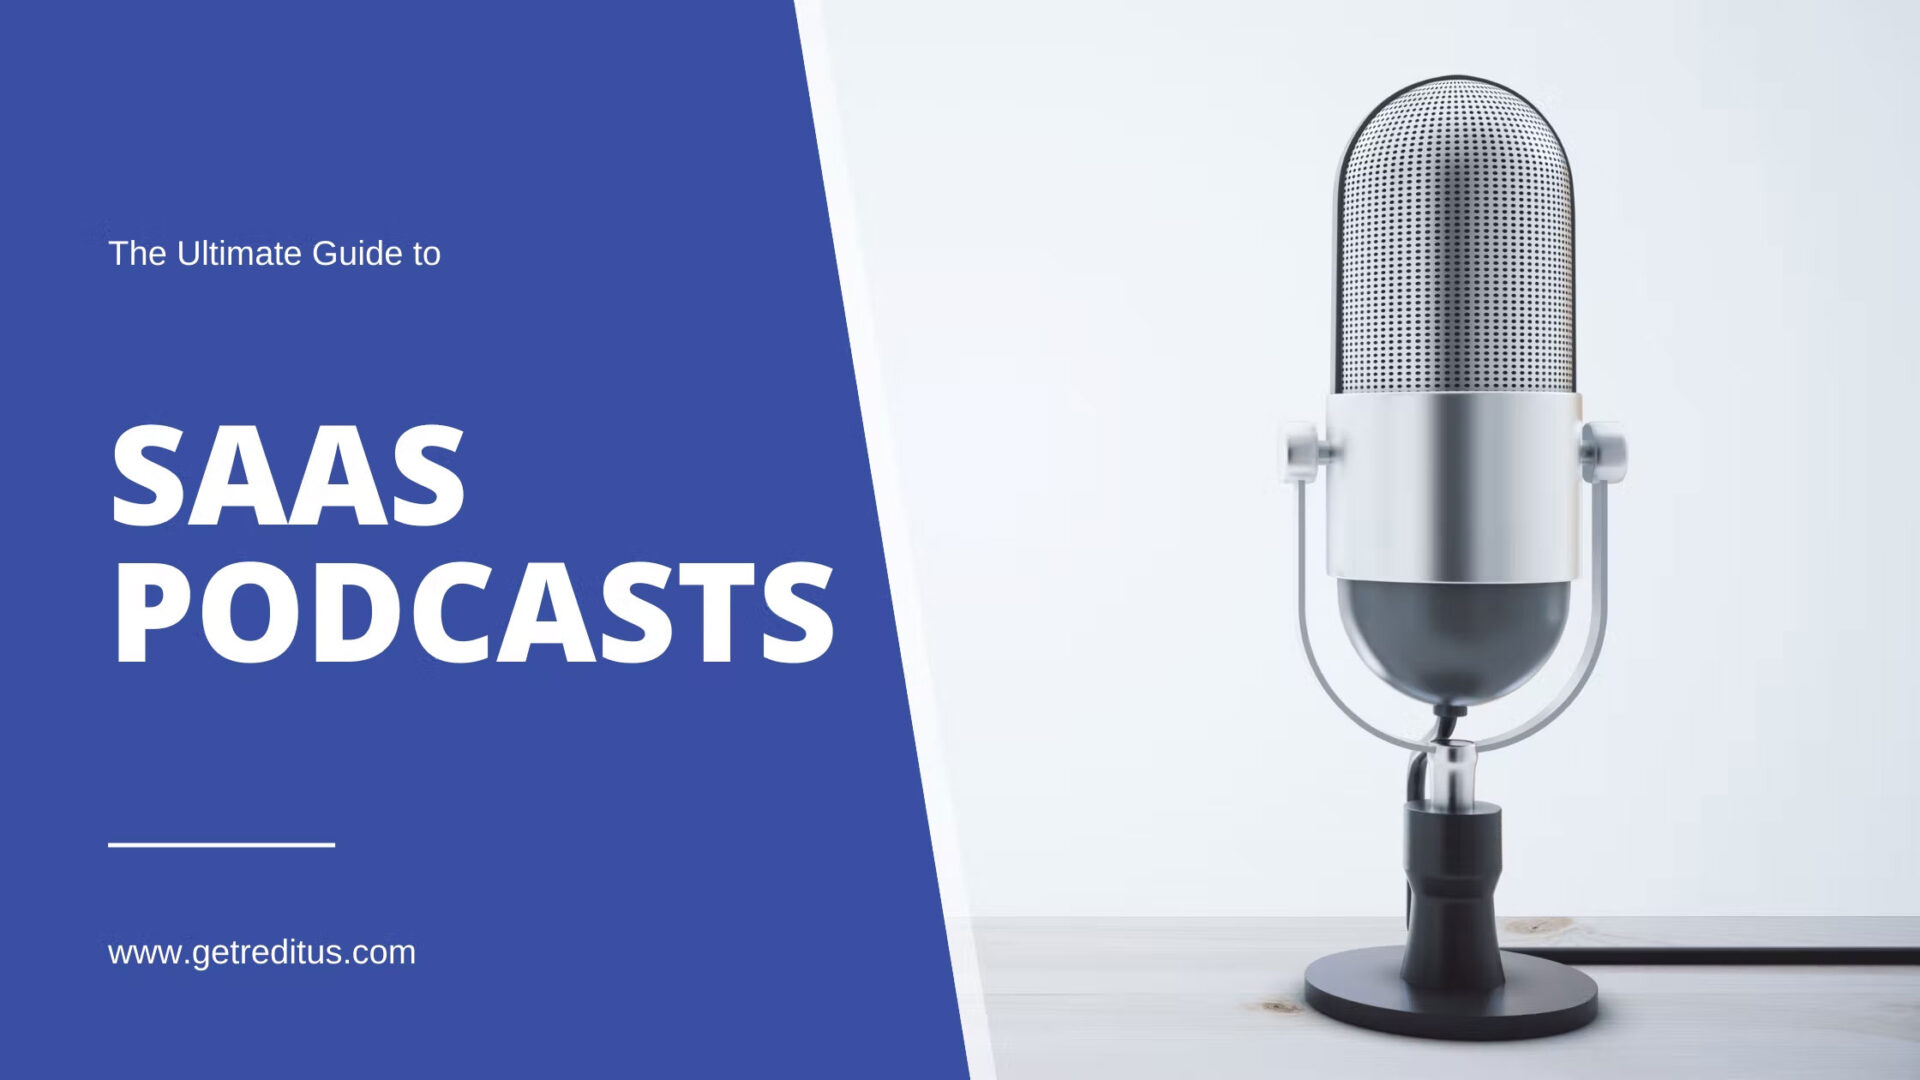 https://www.getreditus.com/blog/ultimate-guide-saas-podcasts/